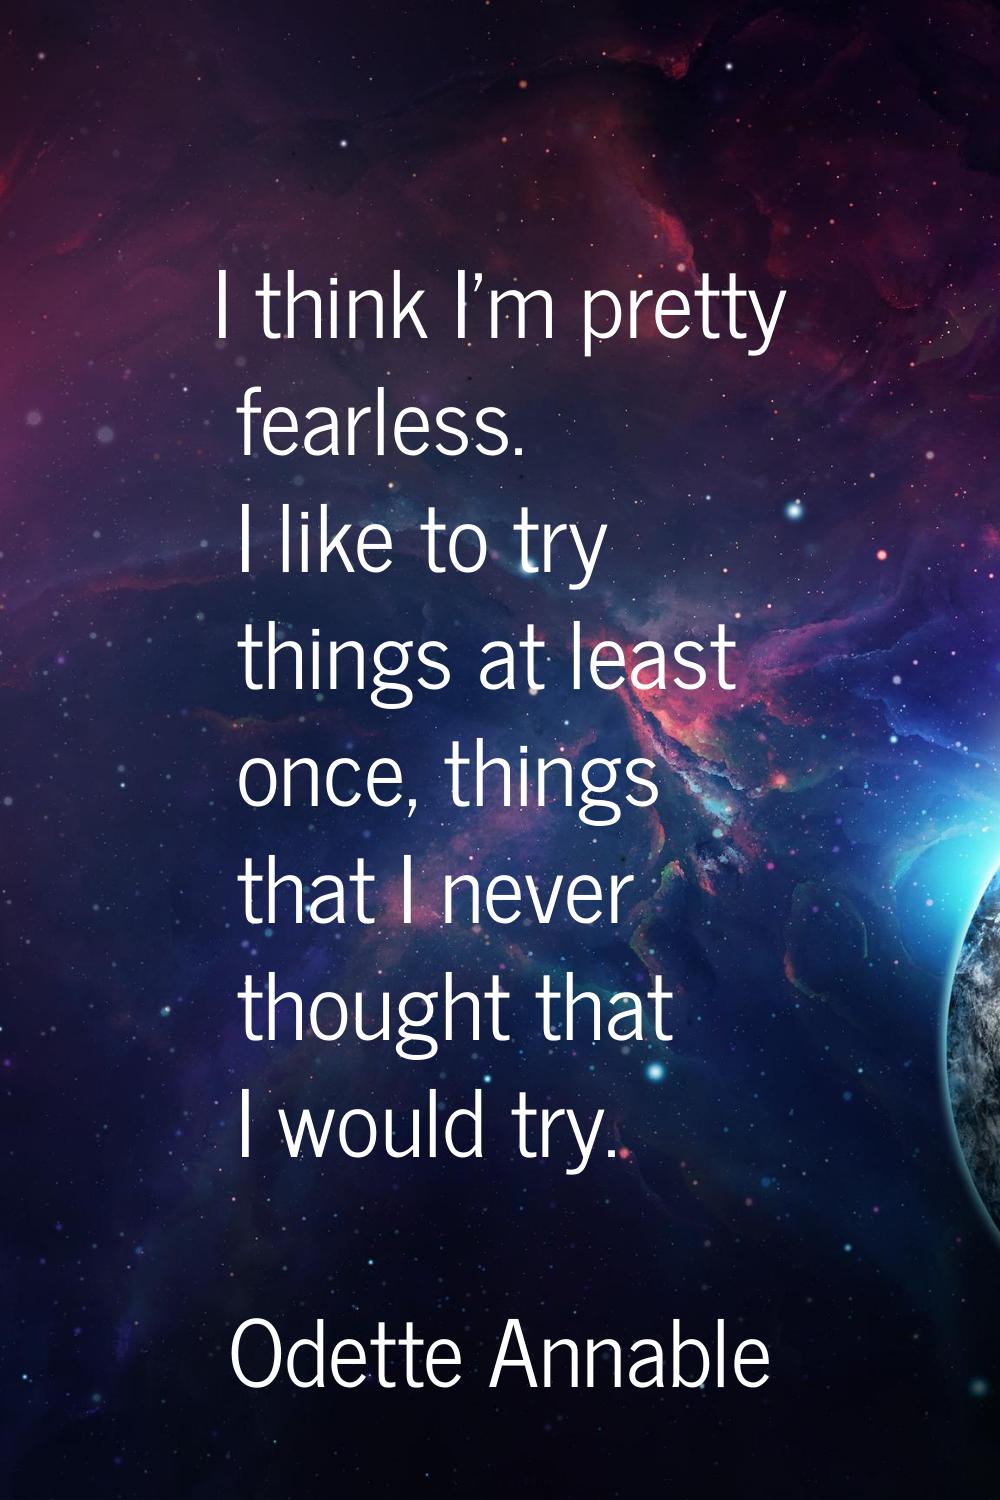 I think I'm pretty fearless. I like to try things at least once, things that I never thought that I